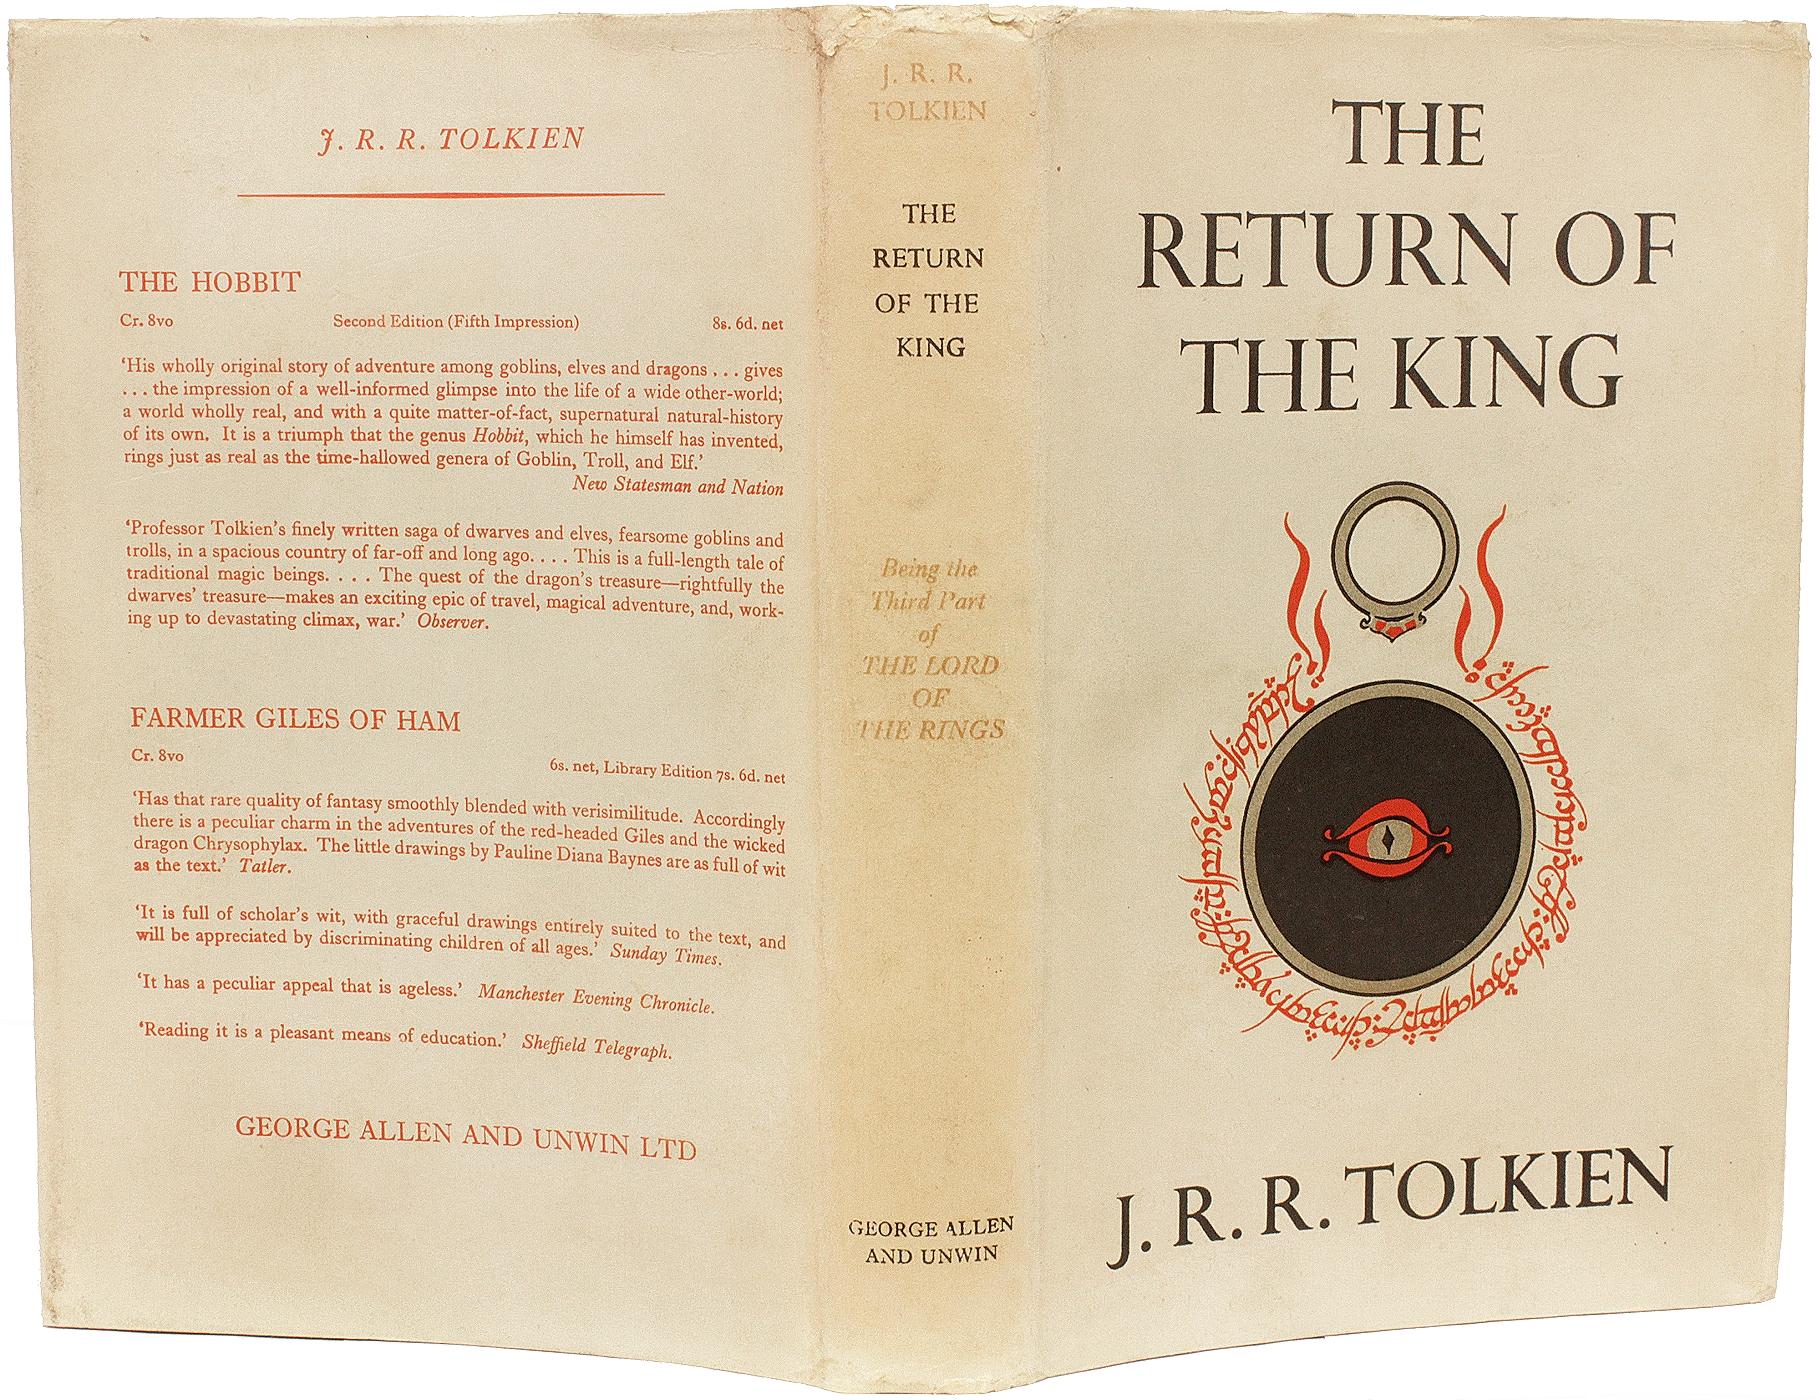 AUTHOR: TOLKIEN, J. R. R.

TITLE: The Return Of The King.

PUBLISHER: London: George Allen & Unwin, 1955.

DESCRIPTION: FIRST EDITION FIRST STATE. 1 vol., first state without signature '4' at foot of page 49, with the original DJ, not price clipped,